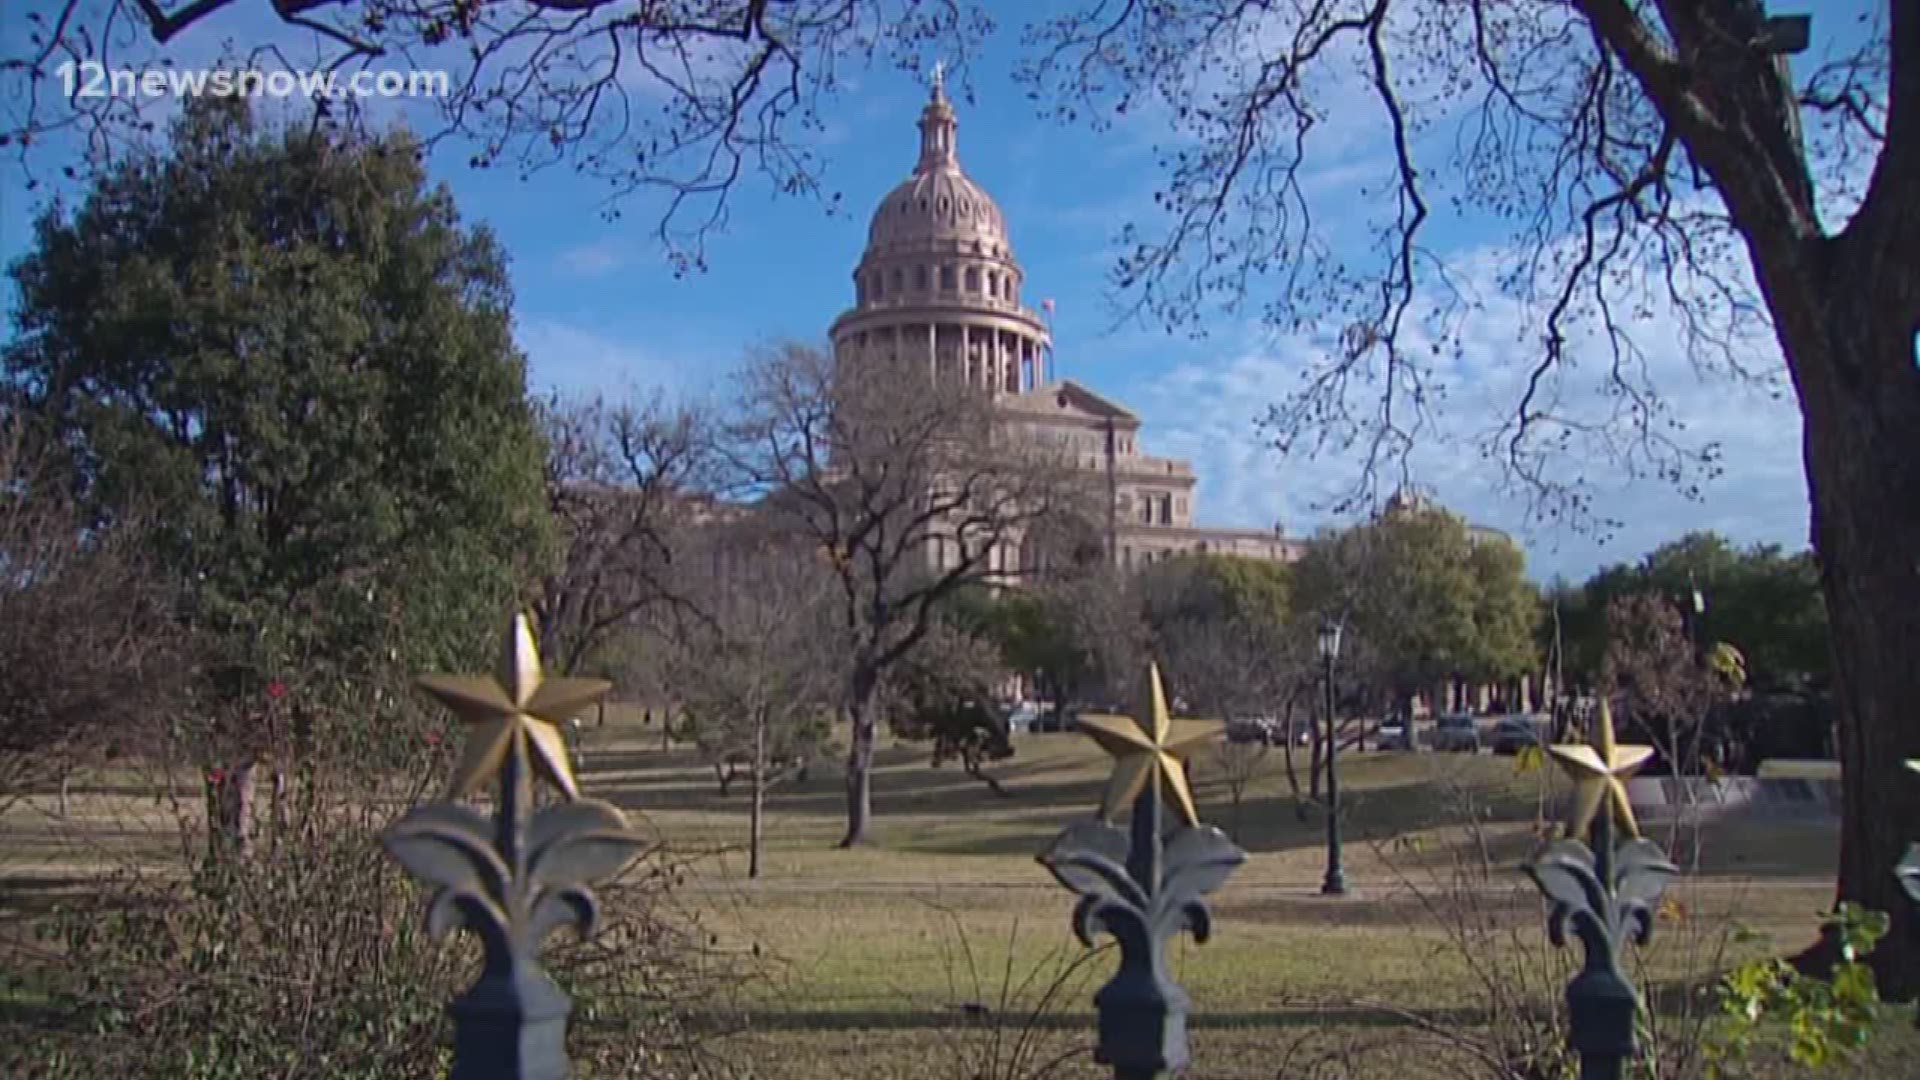 Texas lawmakers are looking for a way to deal with "slap Laws" which allow wealthy companies and people to sue critics for defamation. Lawmakers believe that this is impeding on peoples freedom of speech.